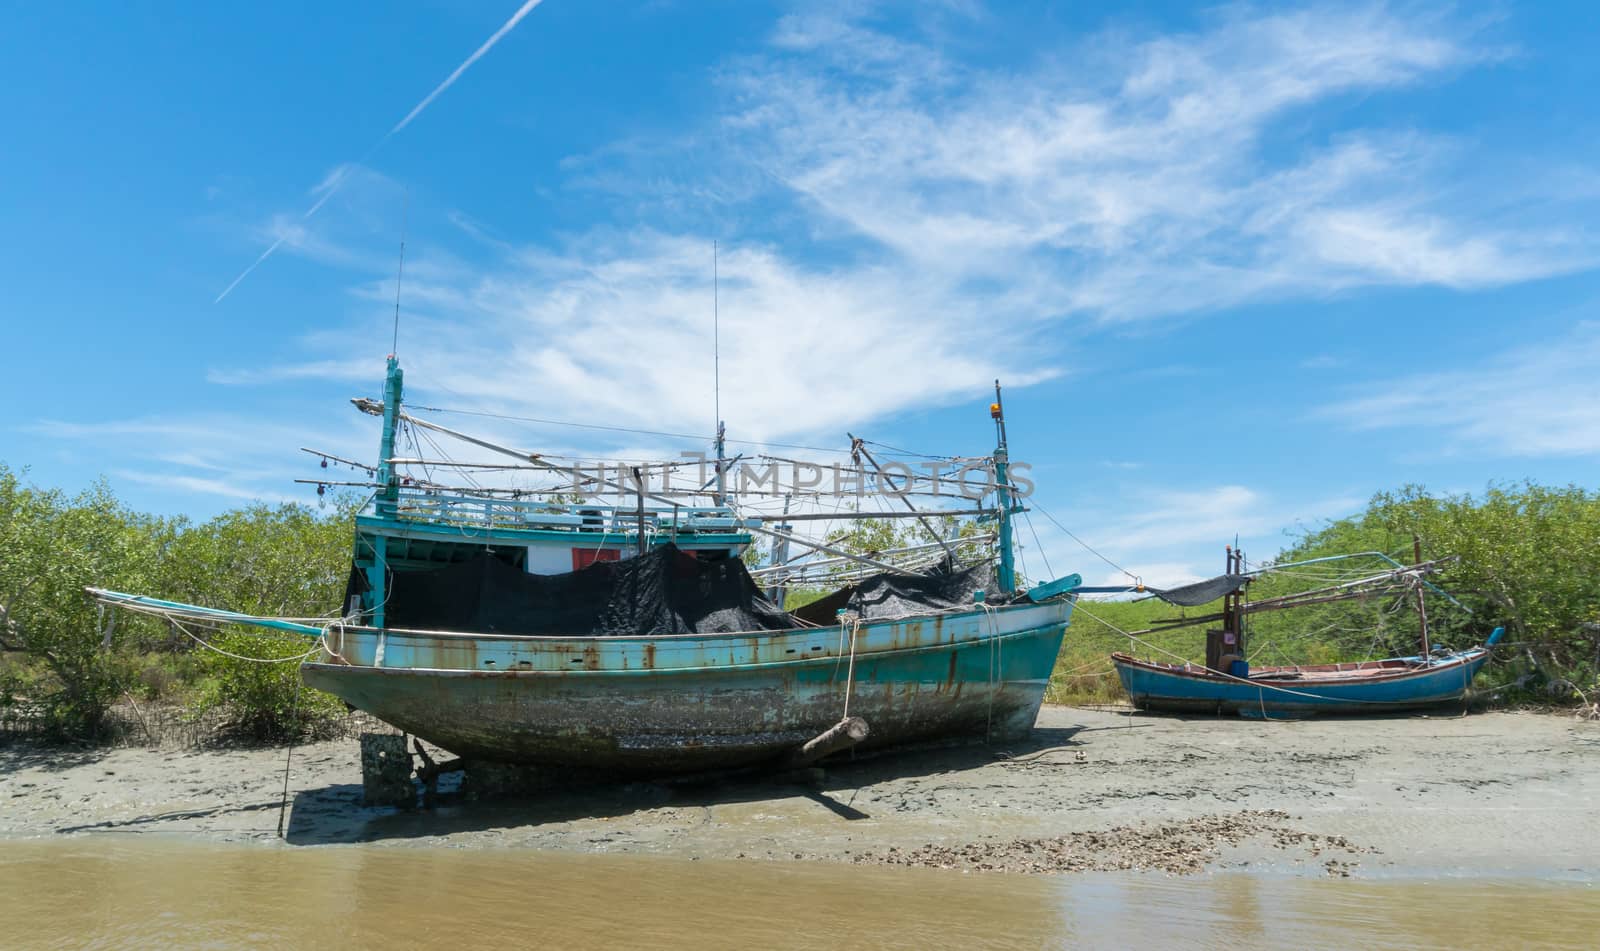 Khao Dang canal boat trip at Prachuap Khiri Khan Thailand. Boat or fishing boat with blue sky and cloud and green tree and water. Landscape or scenery summer concept for boat trip